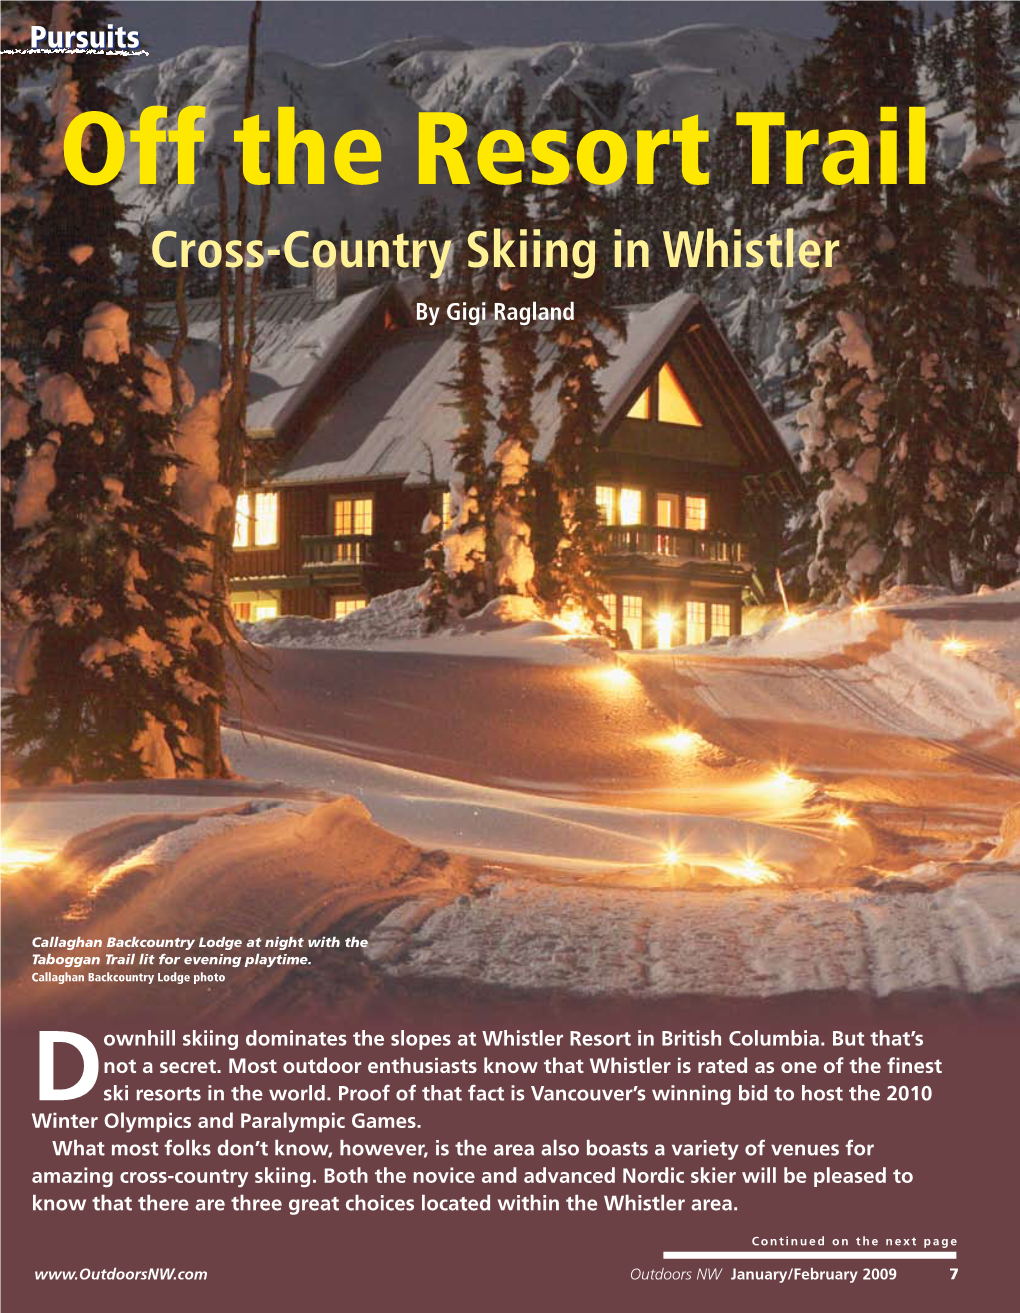 Off the Resort Trail Cross-Country Skiing in Whistler by Gigi Ragland